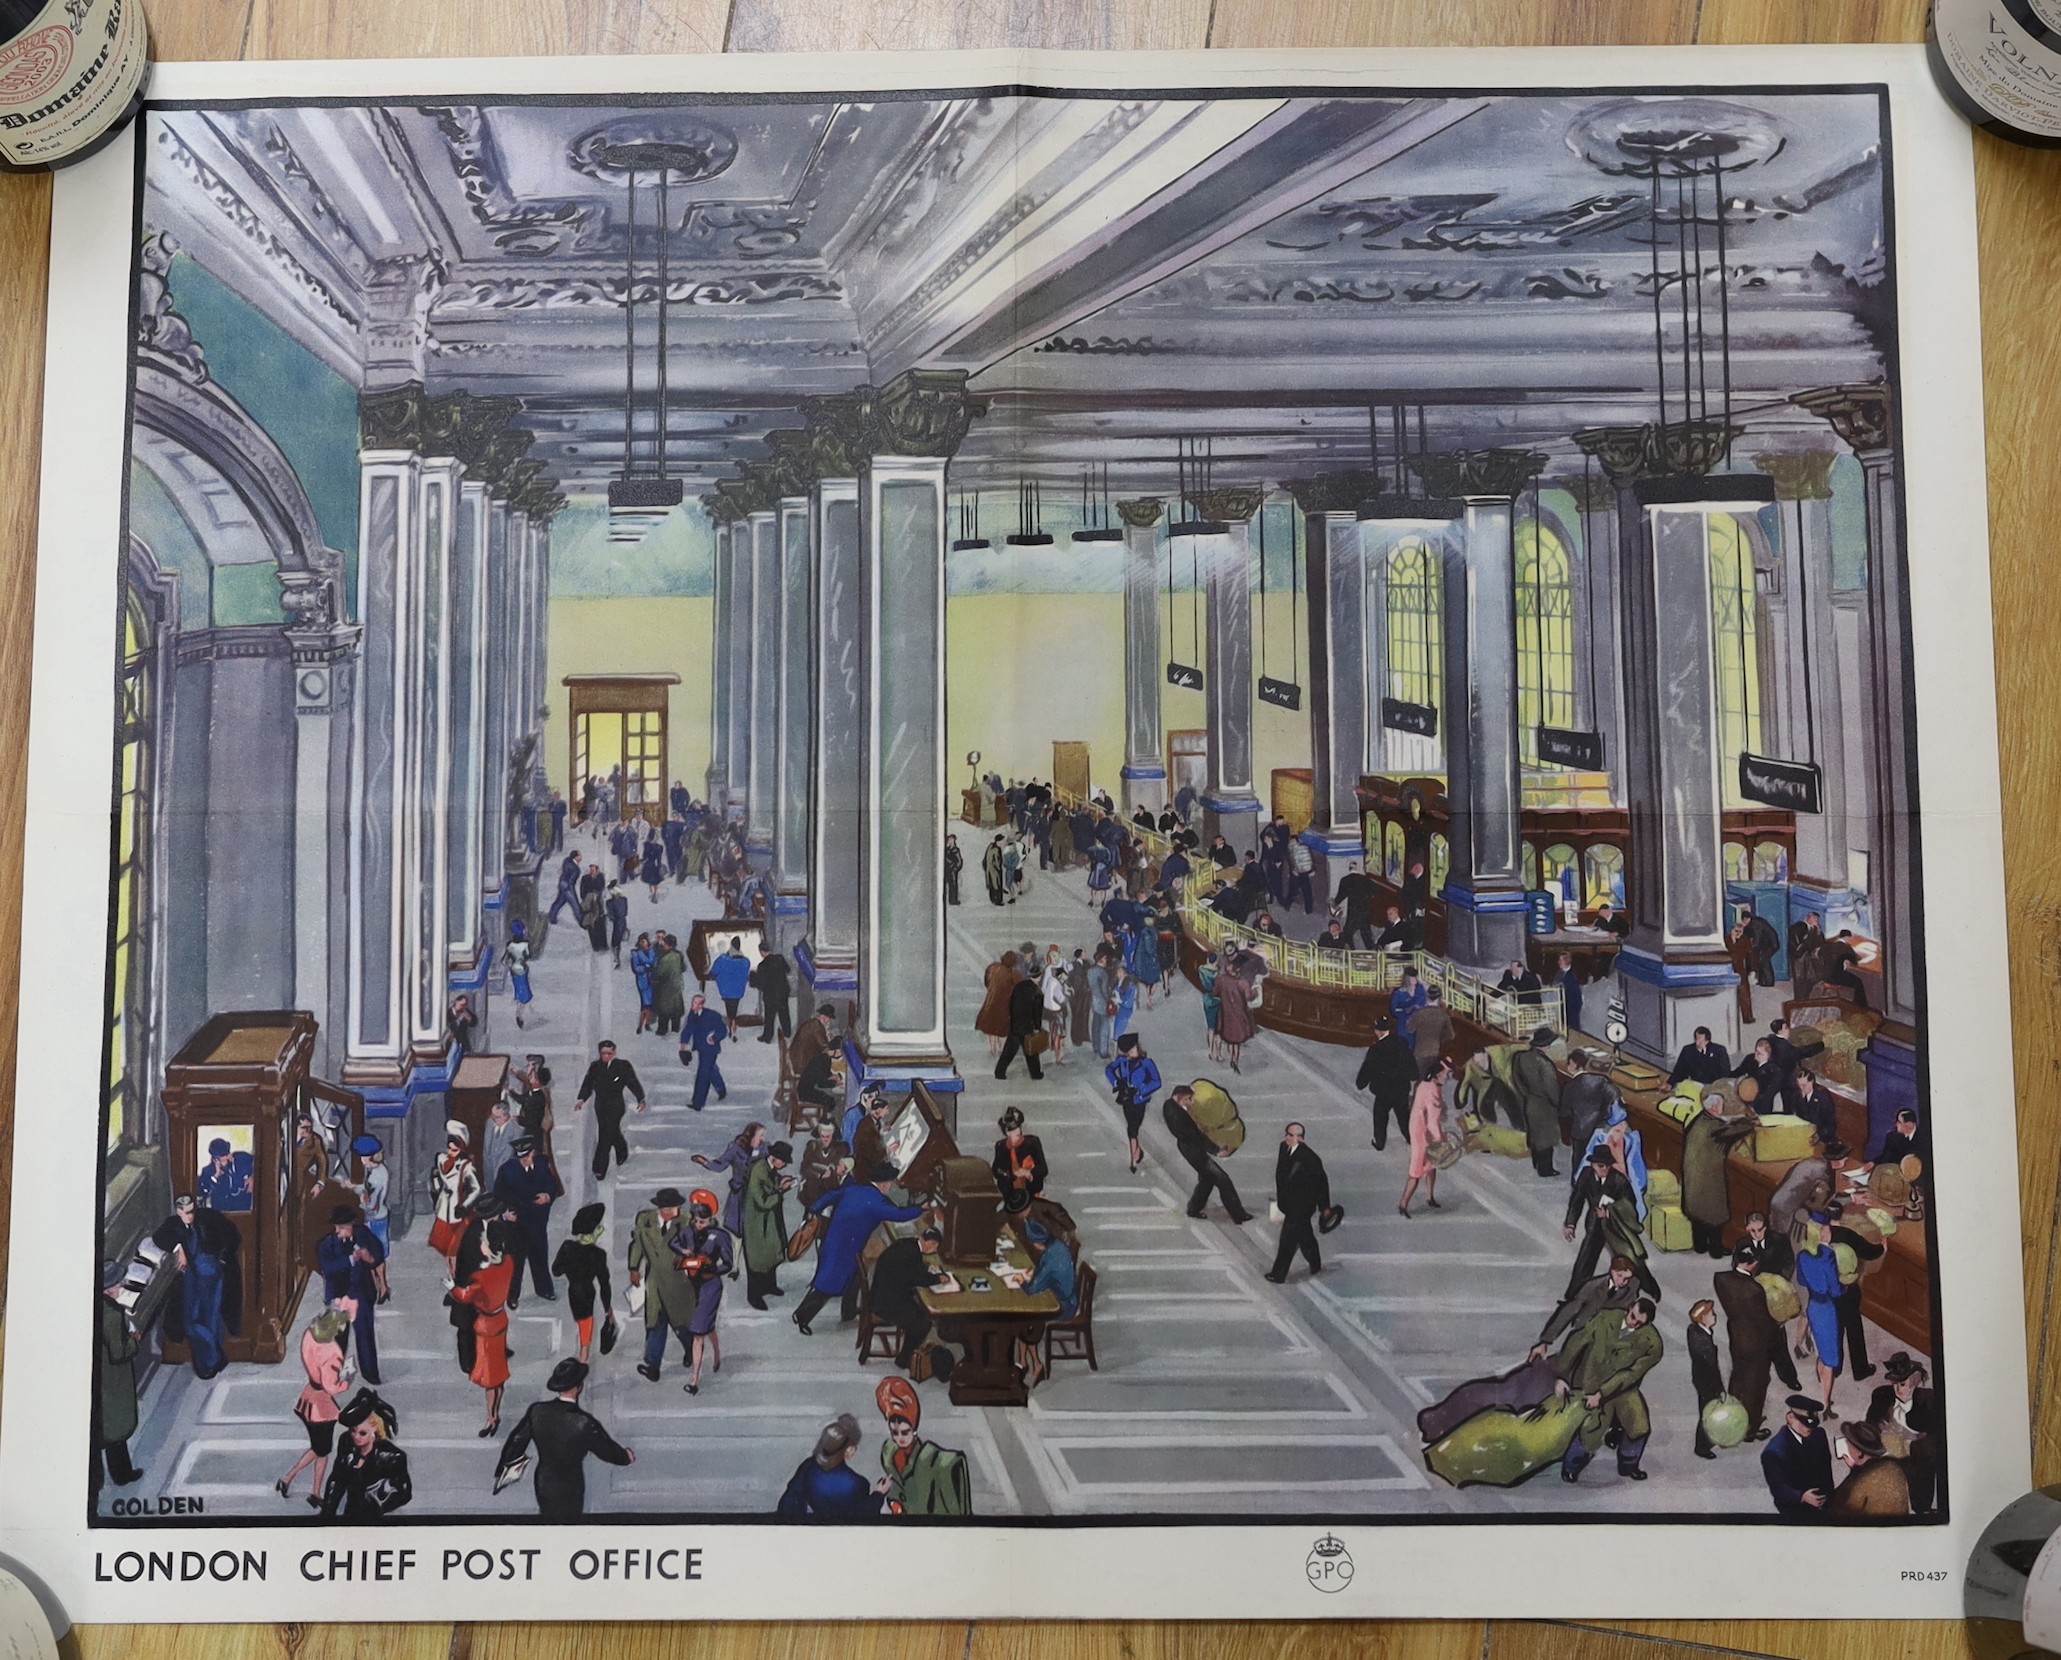 Grace Golden (1904-1993). Four 1950's GPO colour lithographic posters, Euston Station, London Loading Platform, St. Martin's-le-Grand and London Chief Post Office, 52 x 63cm, unframed